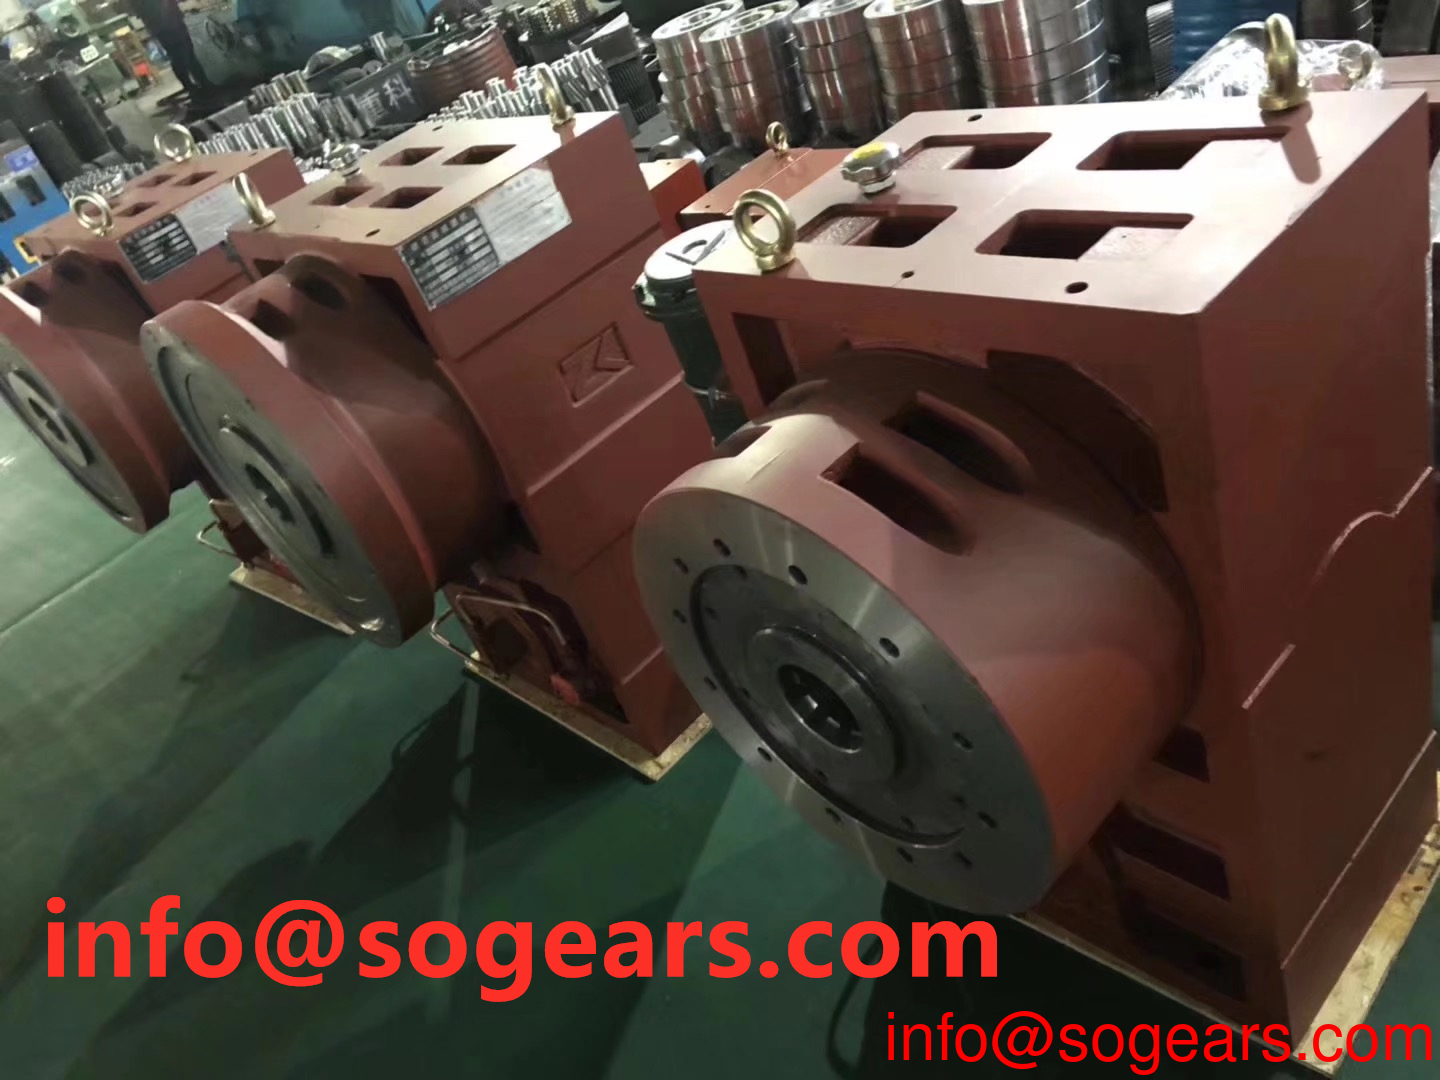 Gearbox for Plastic extruder 